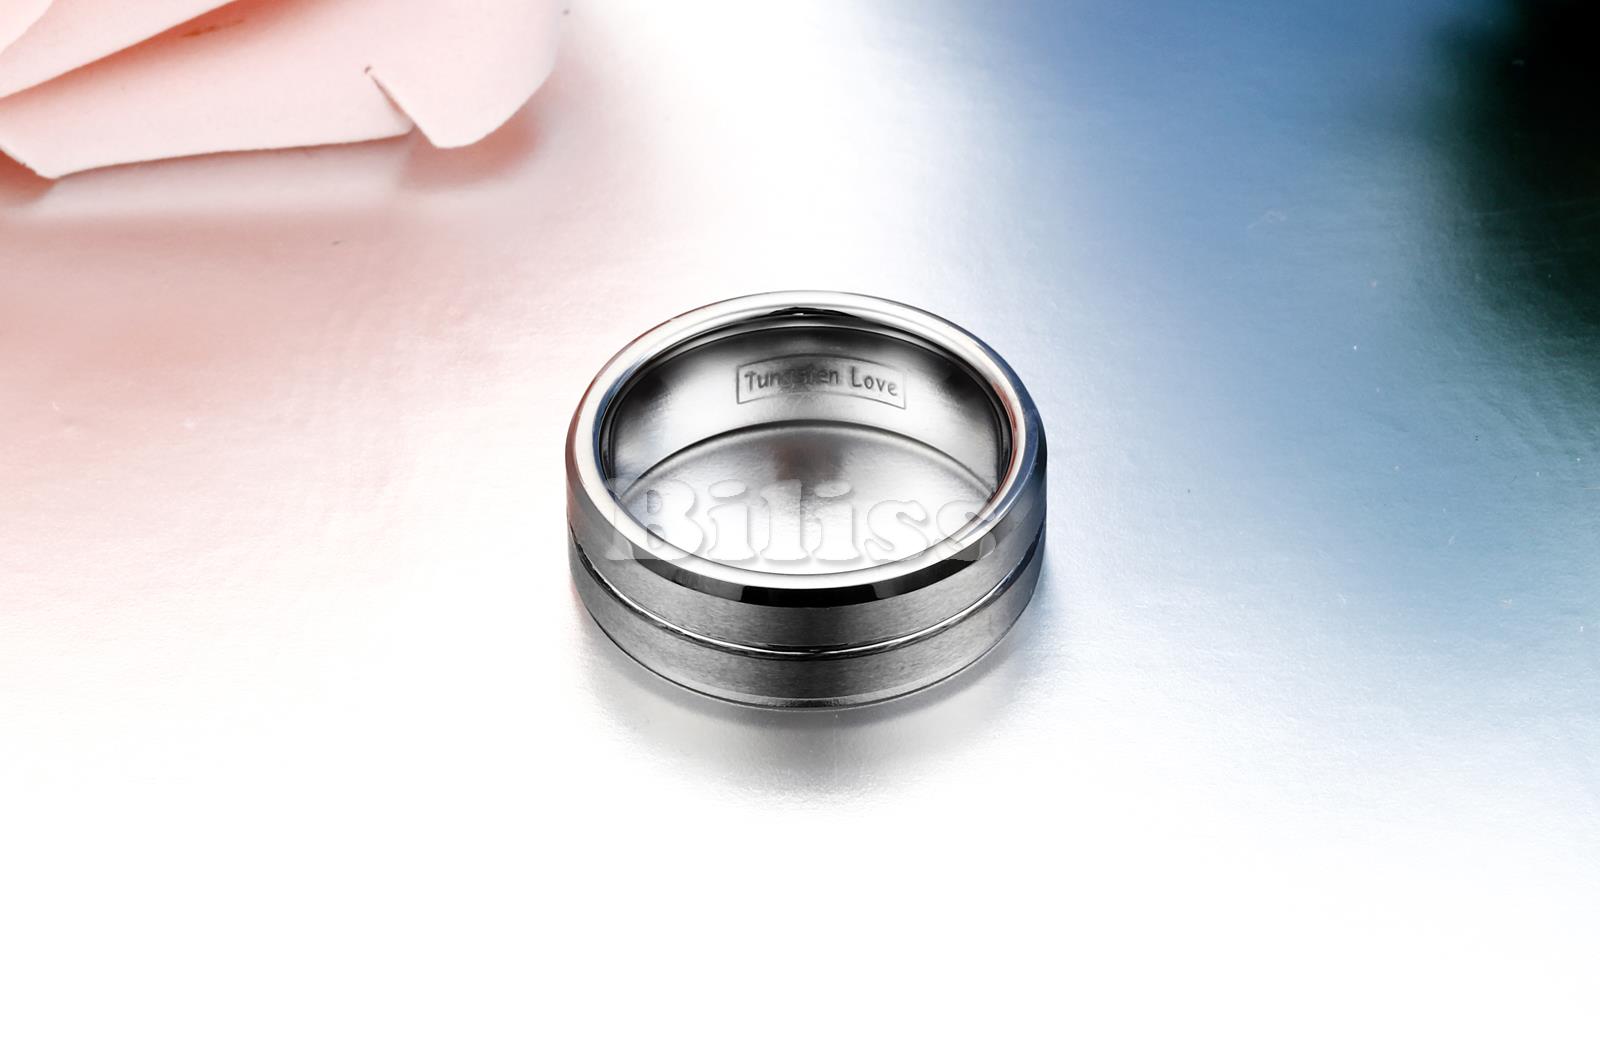 Mens wedding rings clearance